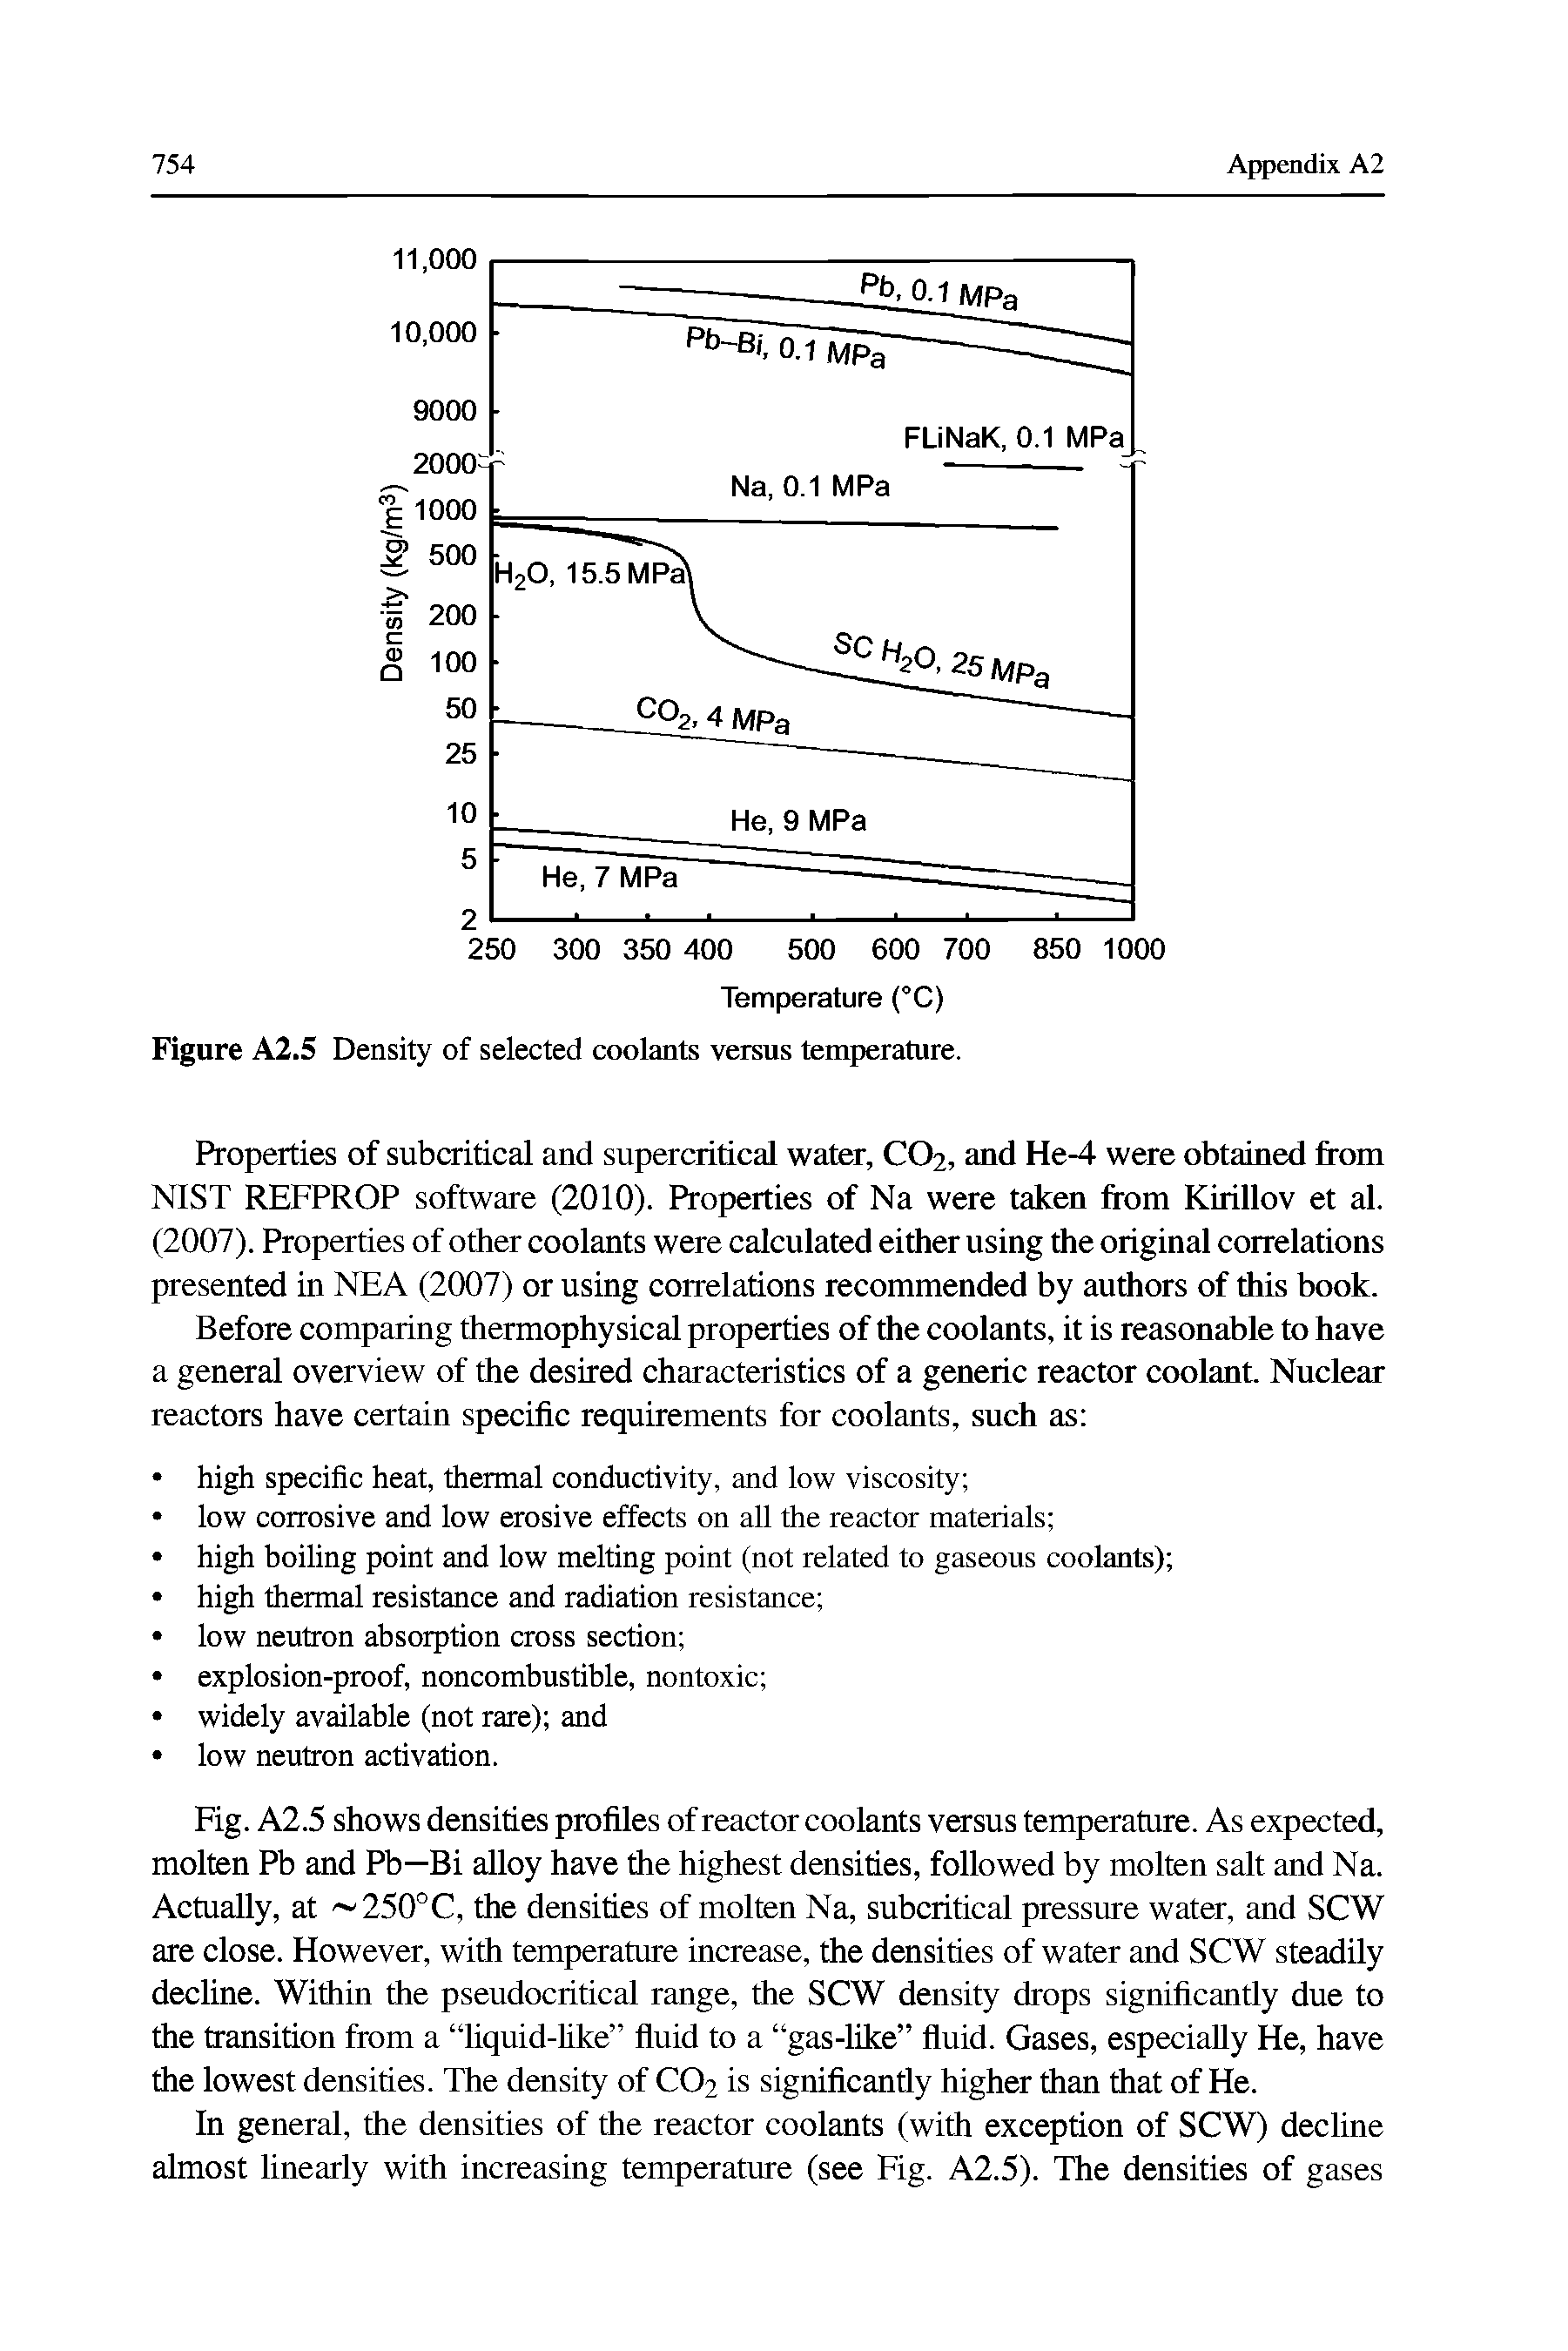 Fig. A2.5 shows densities profiles of reactor coolants versus temperature. As expected, molten Pb and Pb—Bi alloy have the highest densities, followed by molten salt and Na. Actually, at 250°C, the densities of molten Na, subcritical pressure water, and SCW are close. However, with temperature increase, the densities of water and SCW steadily decline. Within the pseudocritical range, the SCW density drops significantly due to the transition from a liquid-hke fluid to a gas-like fluid. Gases, especially He, have the lowest densities. The density of CO2 is significantly higher than that of He.